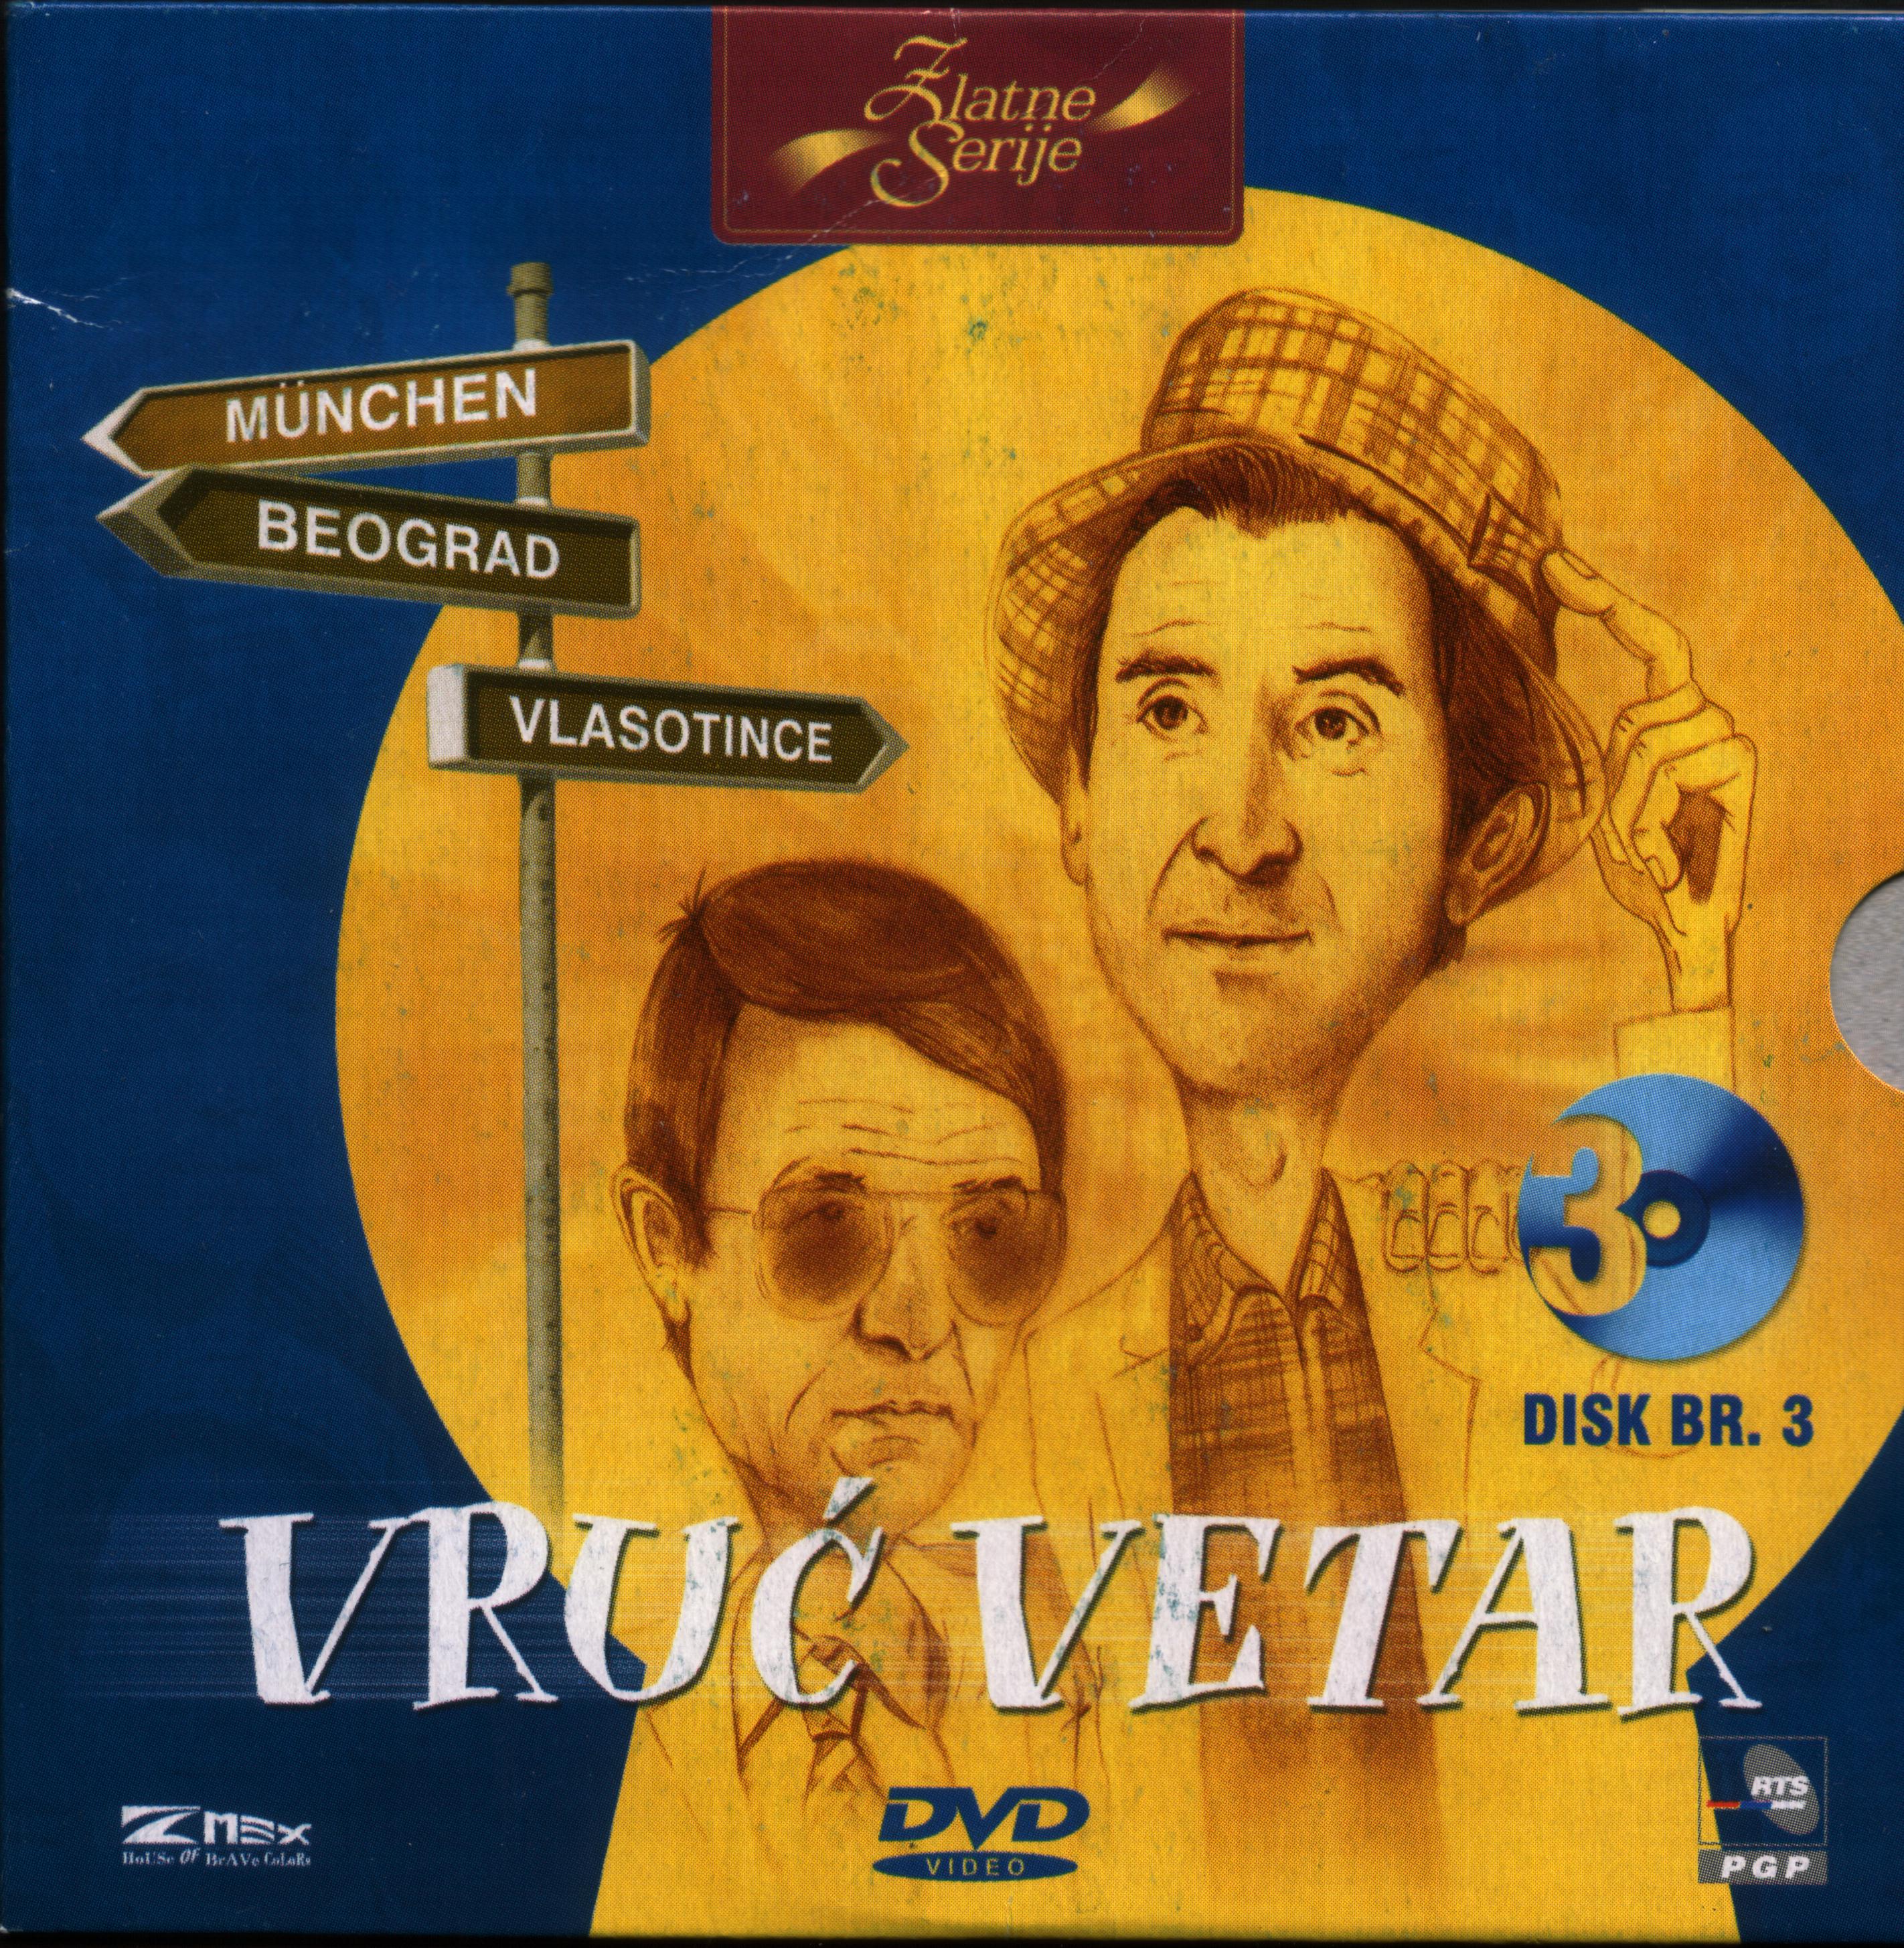 Click to view full size image -  DVD Cover - V - DVD - VRUC VETAR  FRONT - CD3 - DVD - VRUC VETAR  FRONT - CD3.jpg